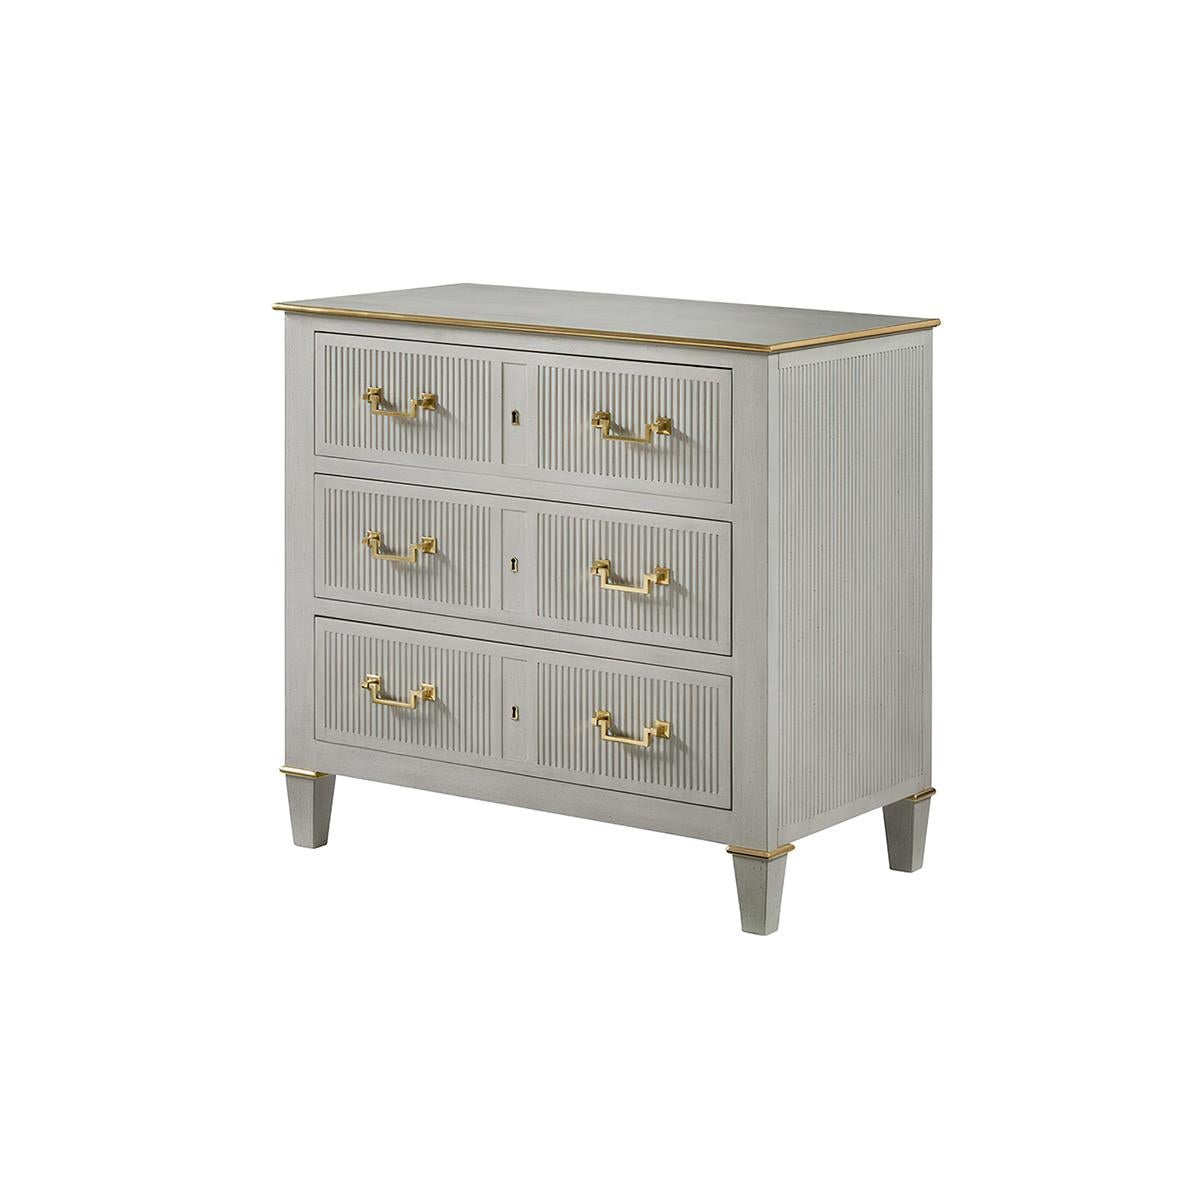 The Transitional Painted Bedside chest is fitted with three drawers and has an antiqued painted finish. With brass molded trim, the design features fluted drawer fronts and side panels, with solid brass Neo Classic drawer pulls and raised on short